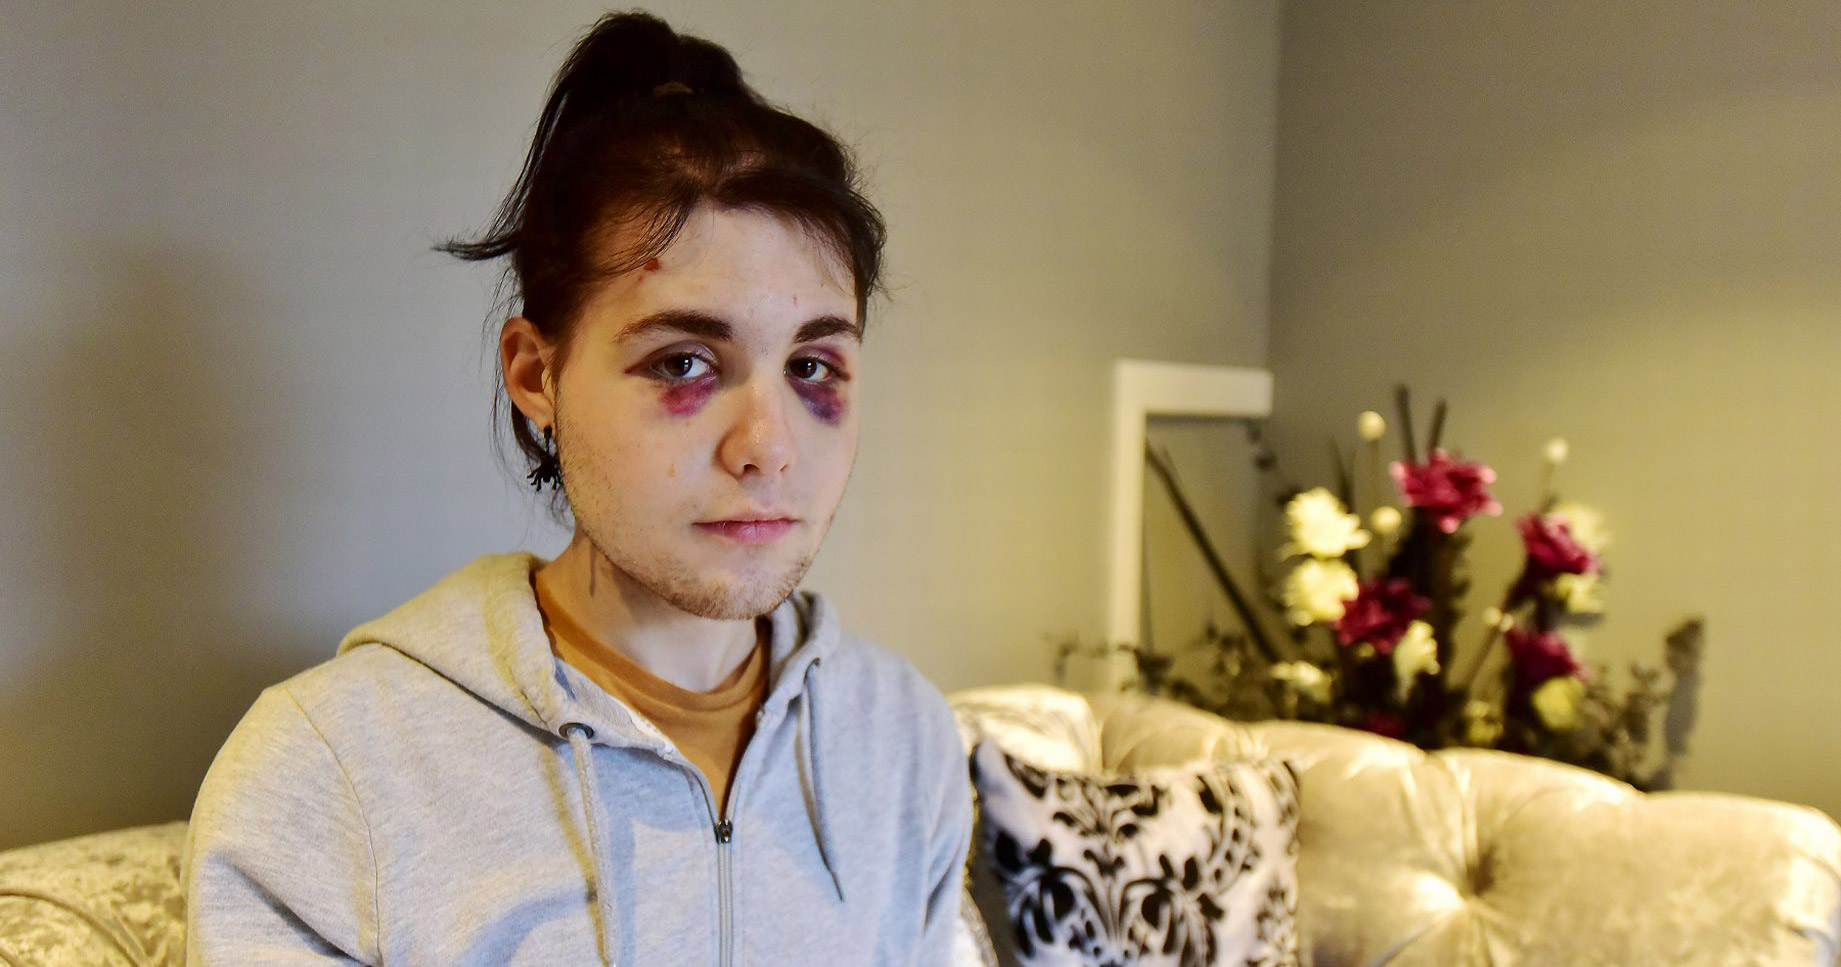 queer teenager who was attacked with his injuries